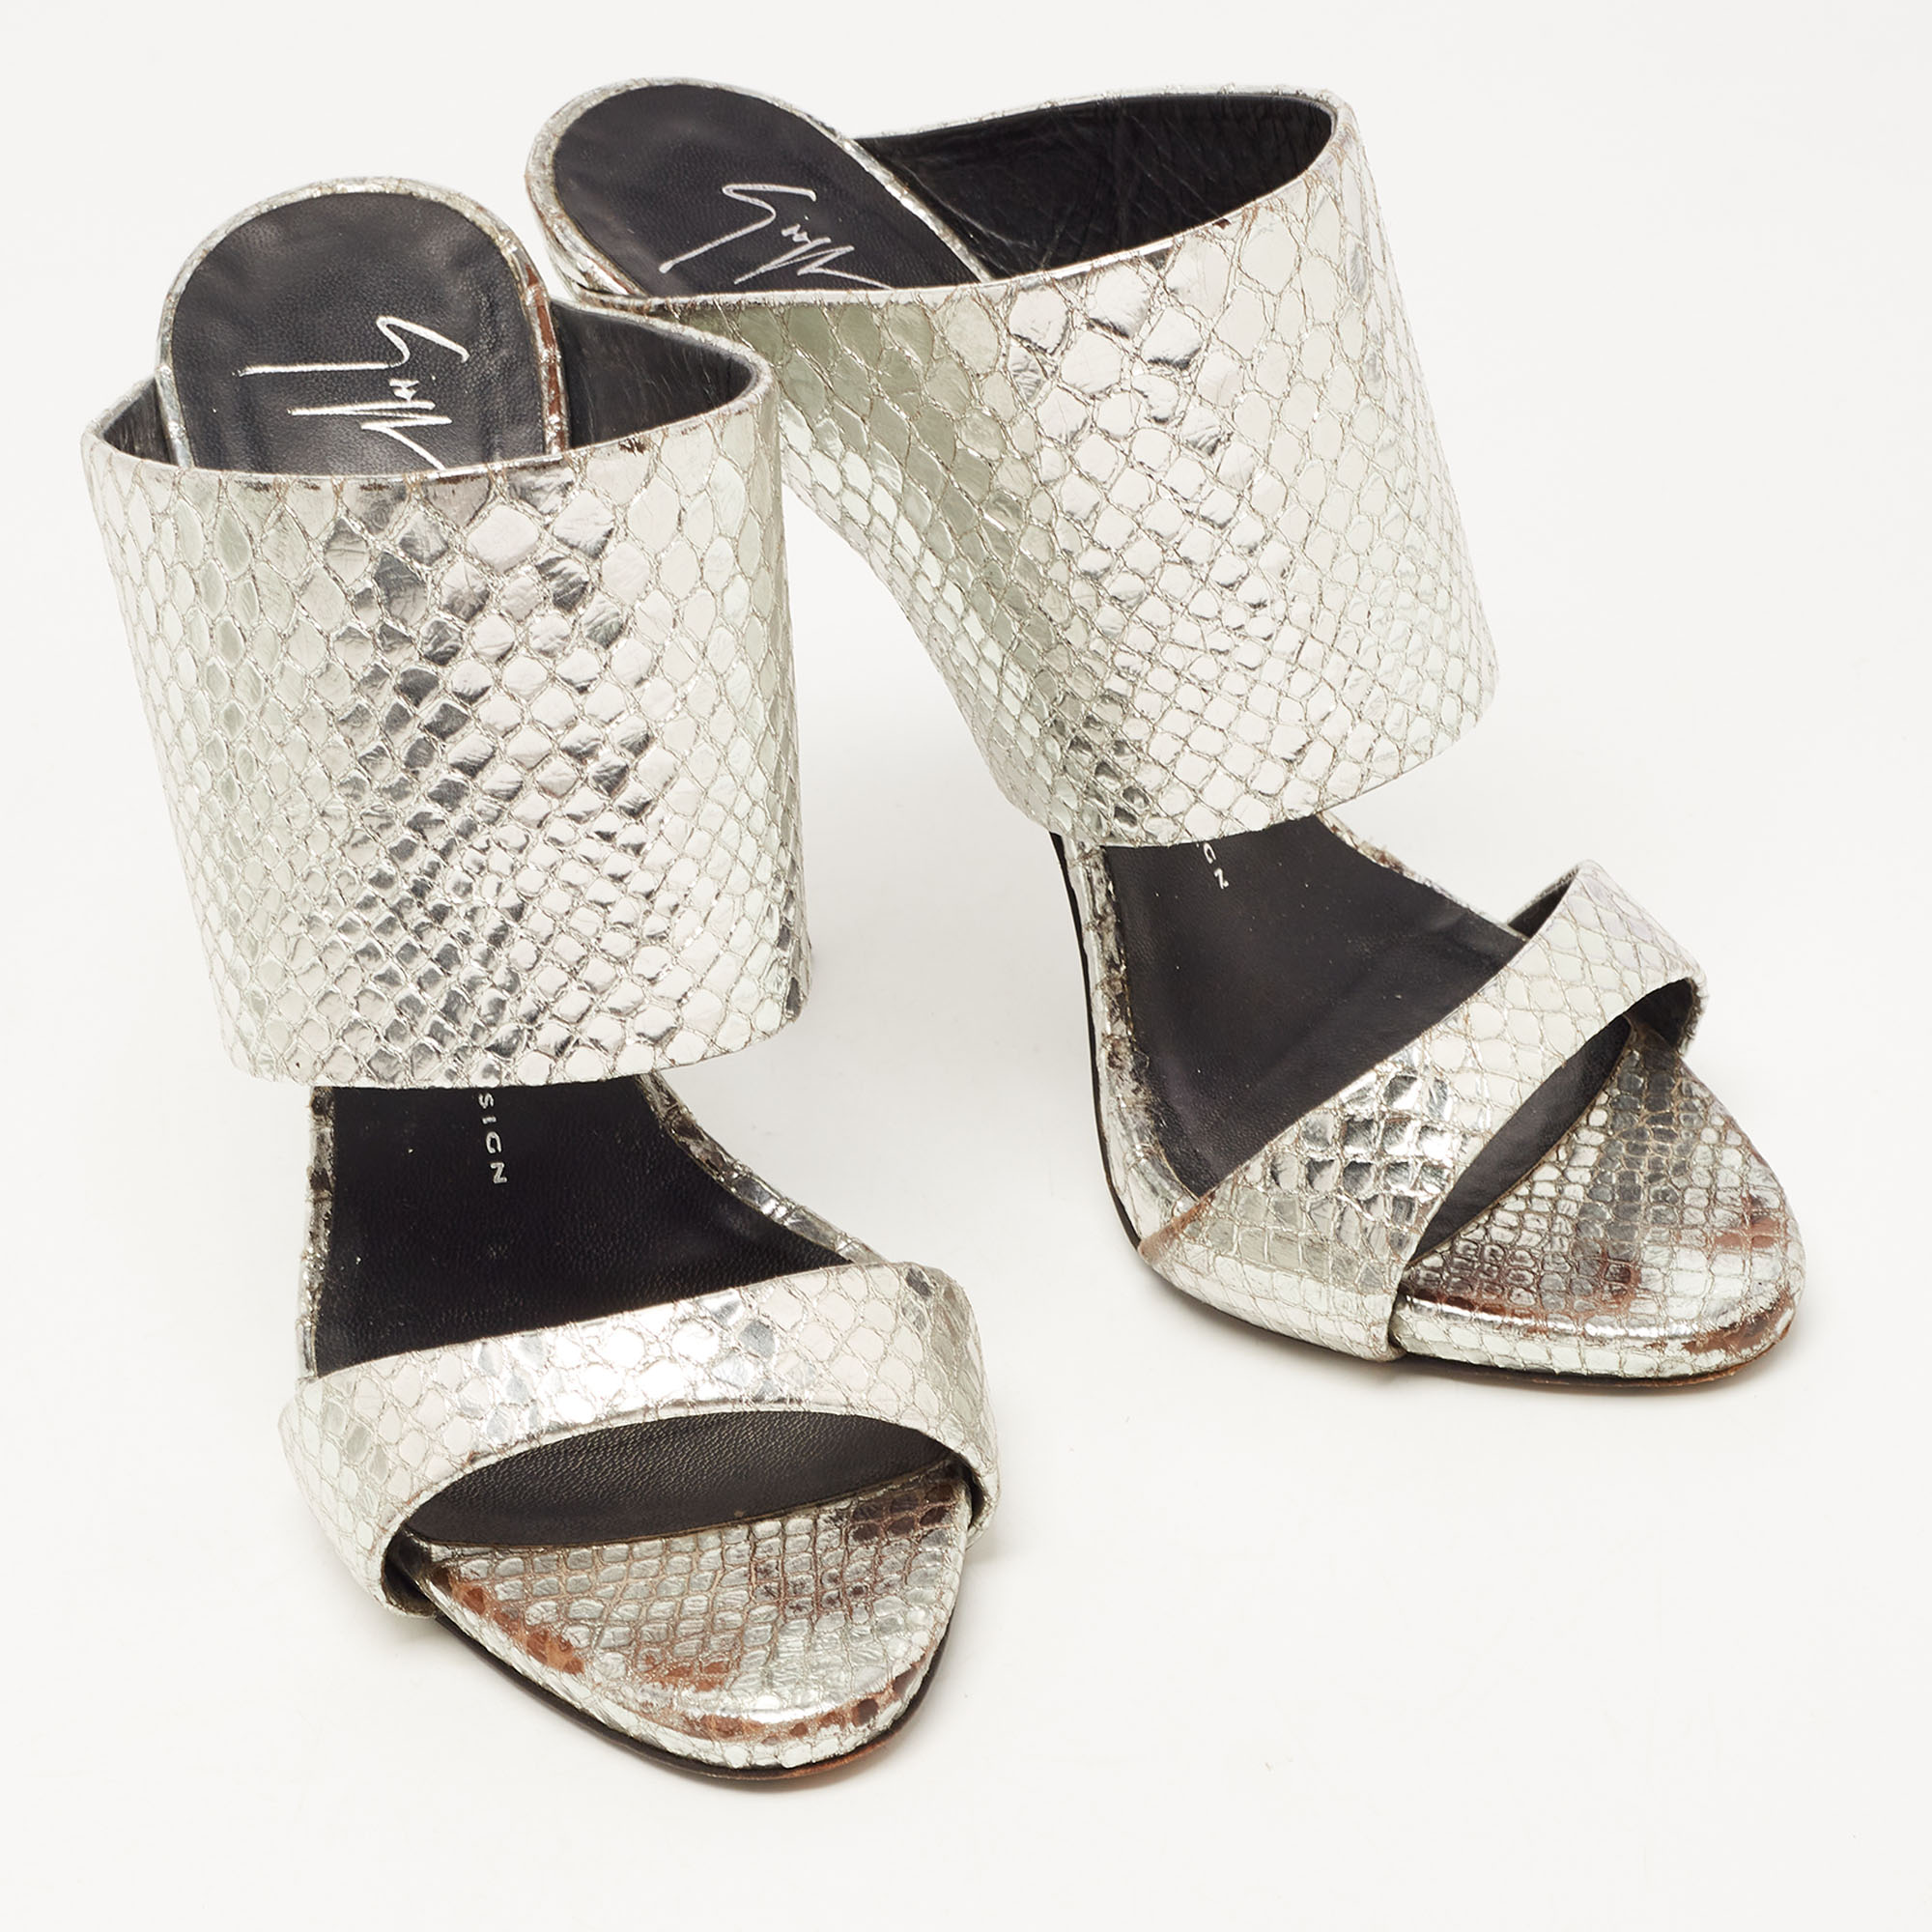 Giuseppe Zanotti Silver Python Embossed Leather Andrea Sandals Size 38.5